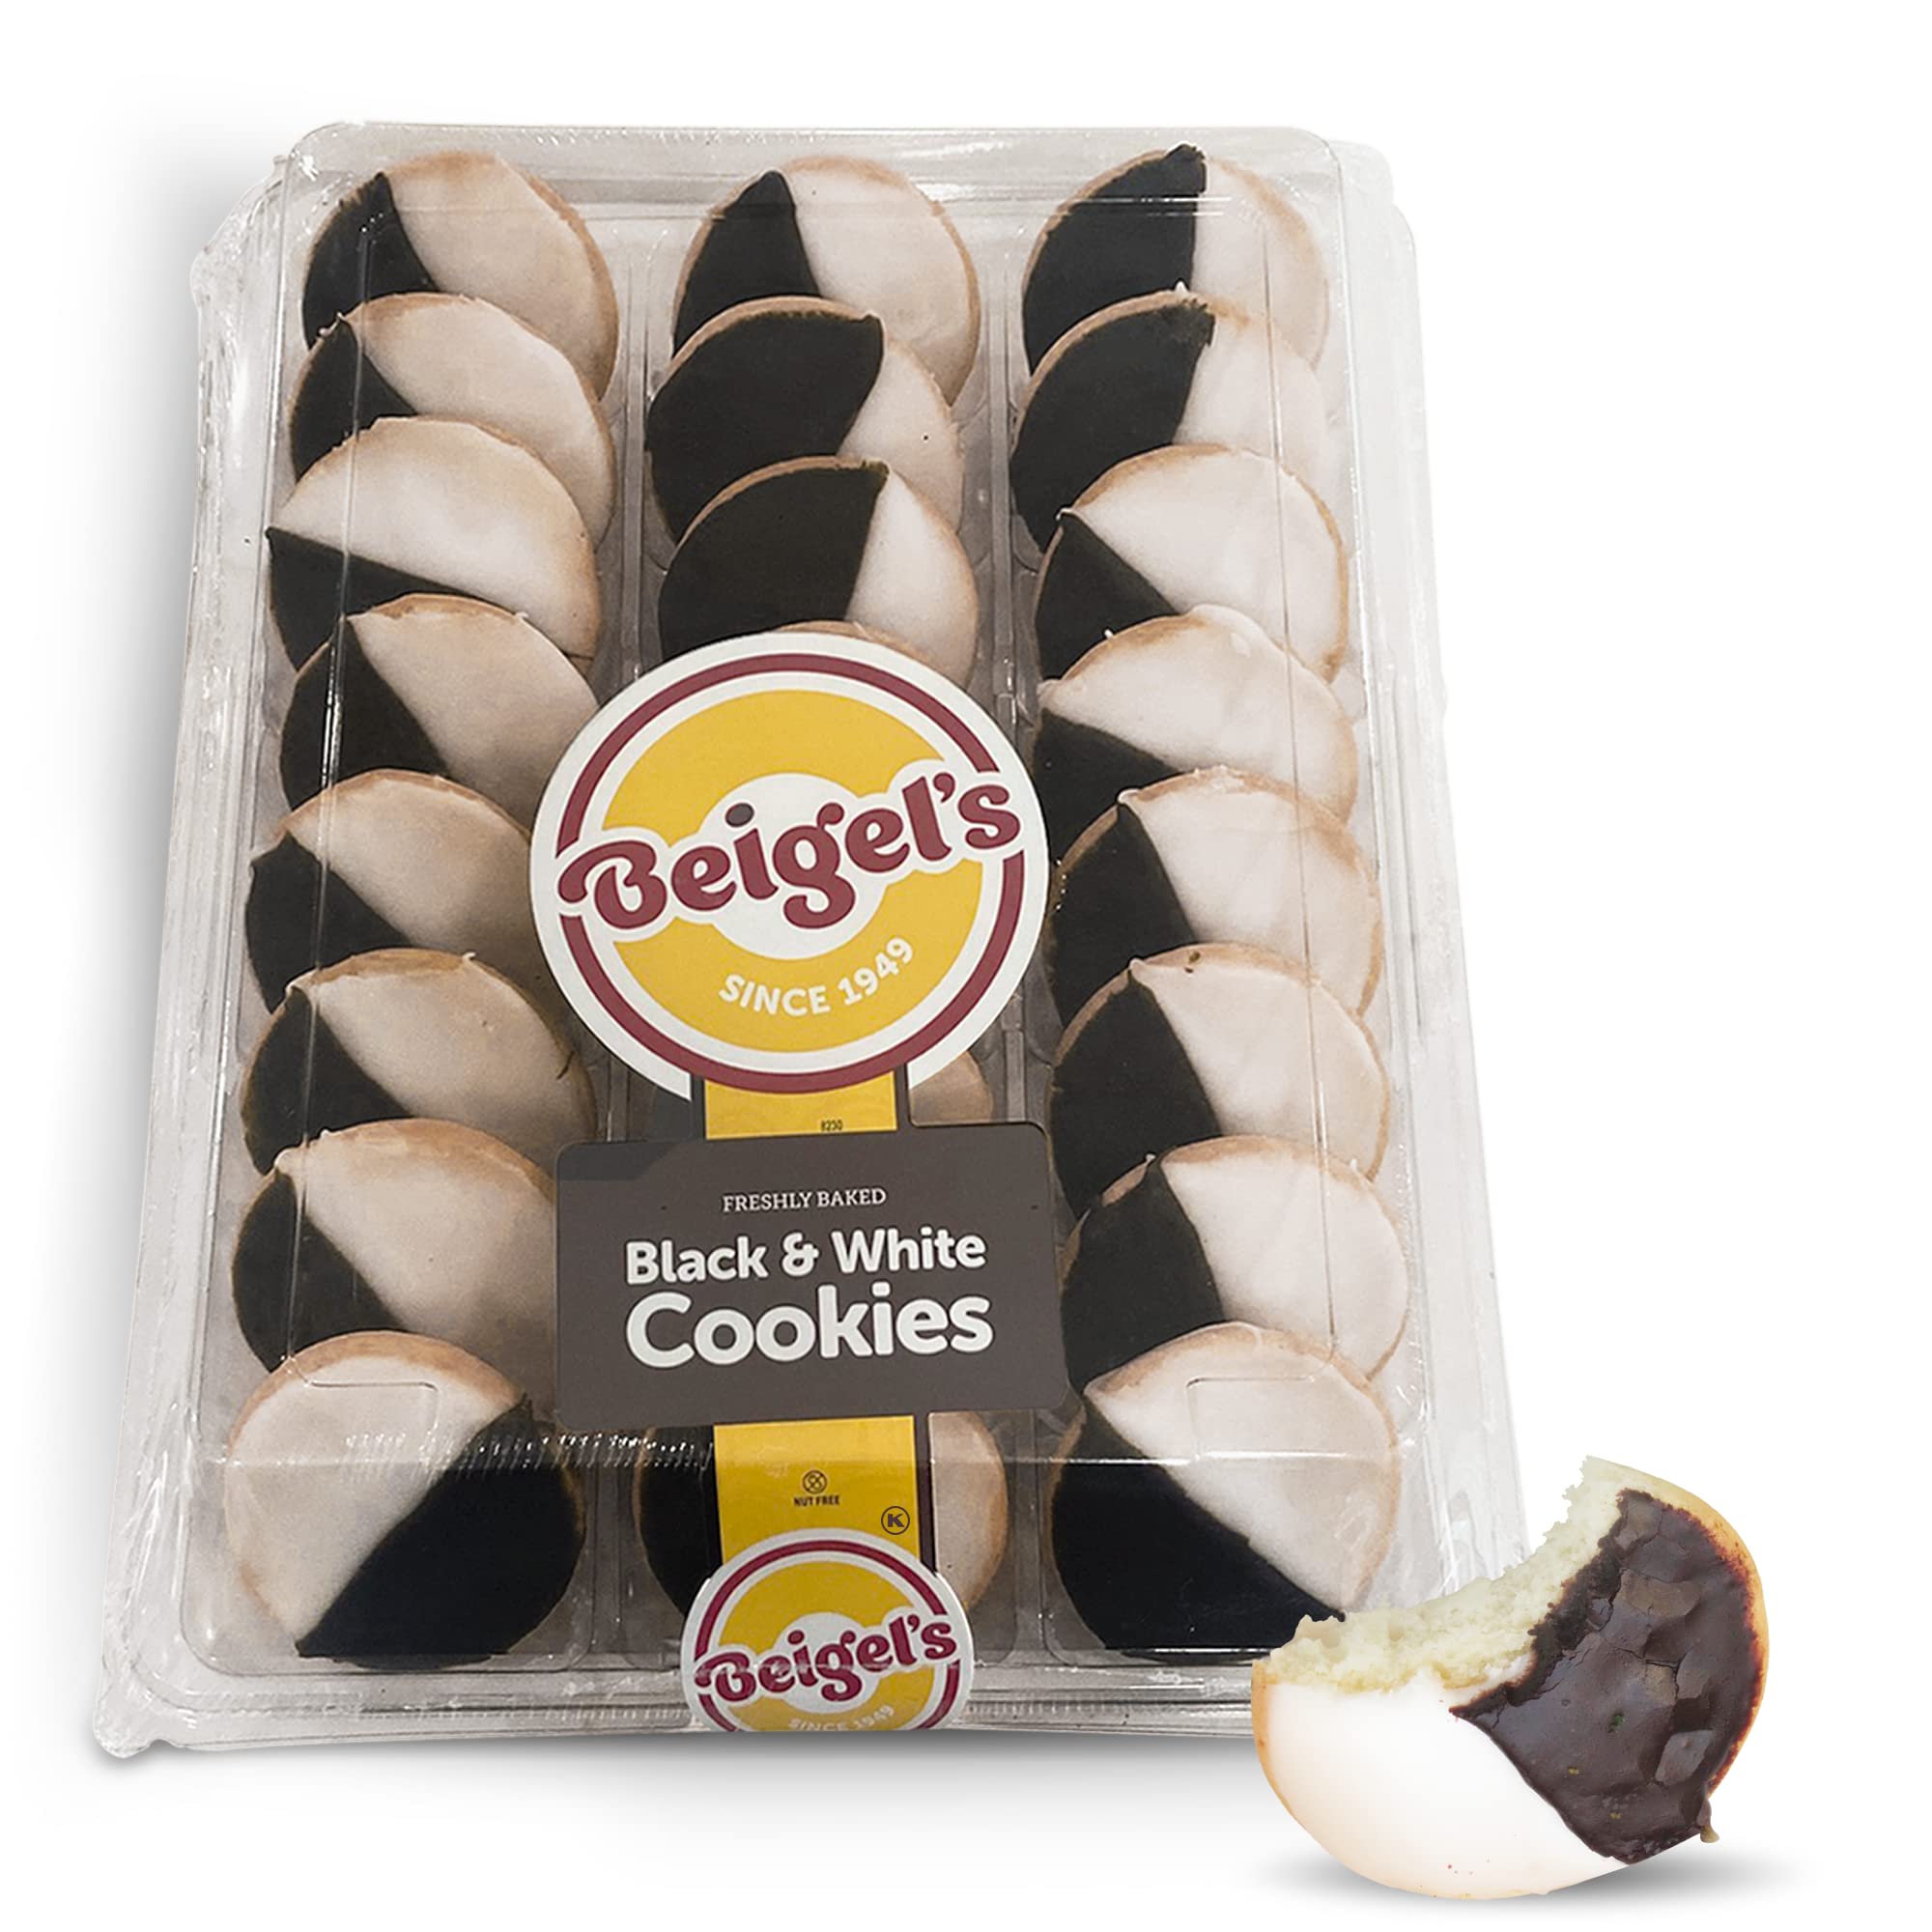 Beigel's Black and White Cookies | New York Style | Fresh Baked Goods | Kosher Snack | 2.4" cookie | 24 Count